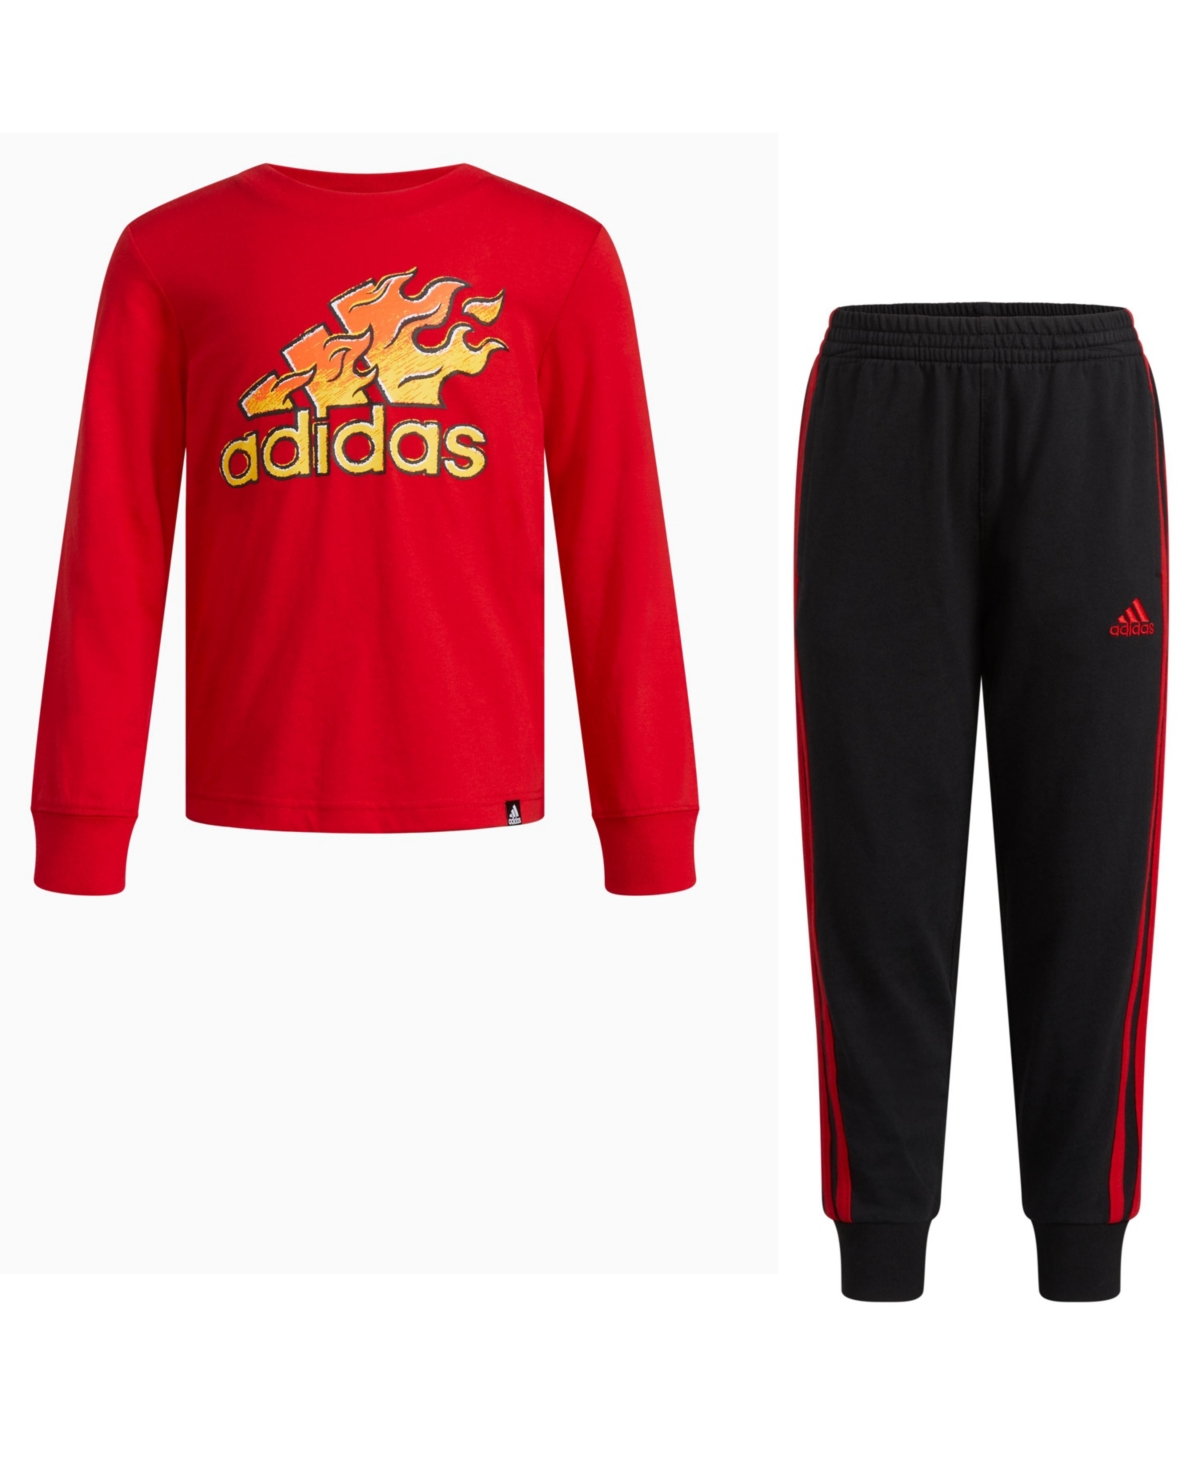 Adidas Originals Little Boys Long Sleeve Cotton T-shirt And Joggers, 2 Piece Set In Better Scarlet